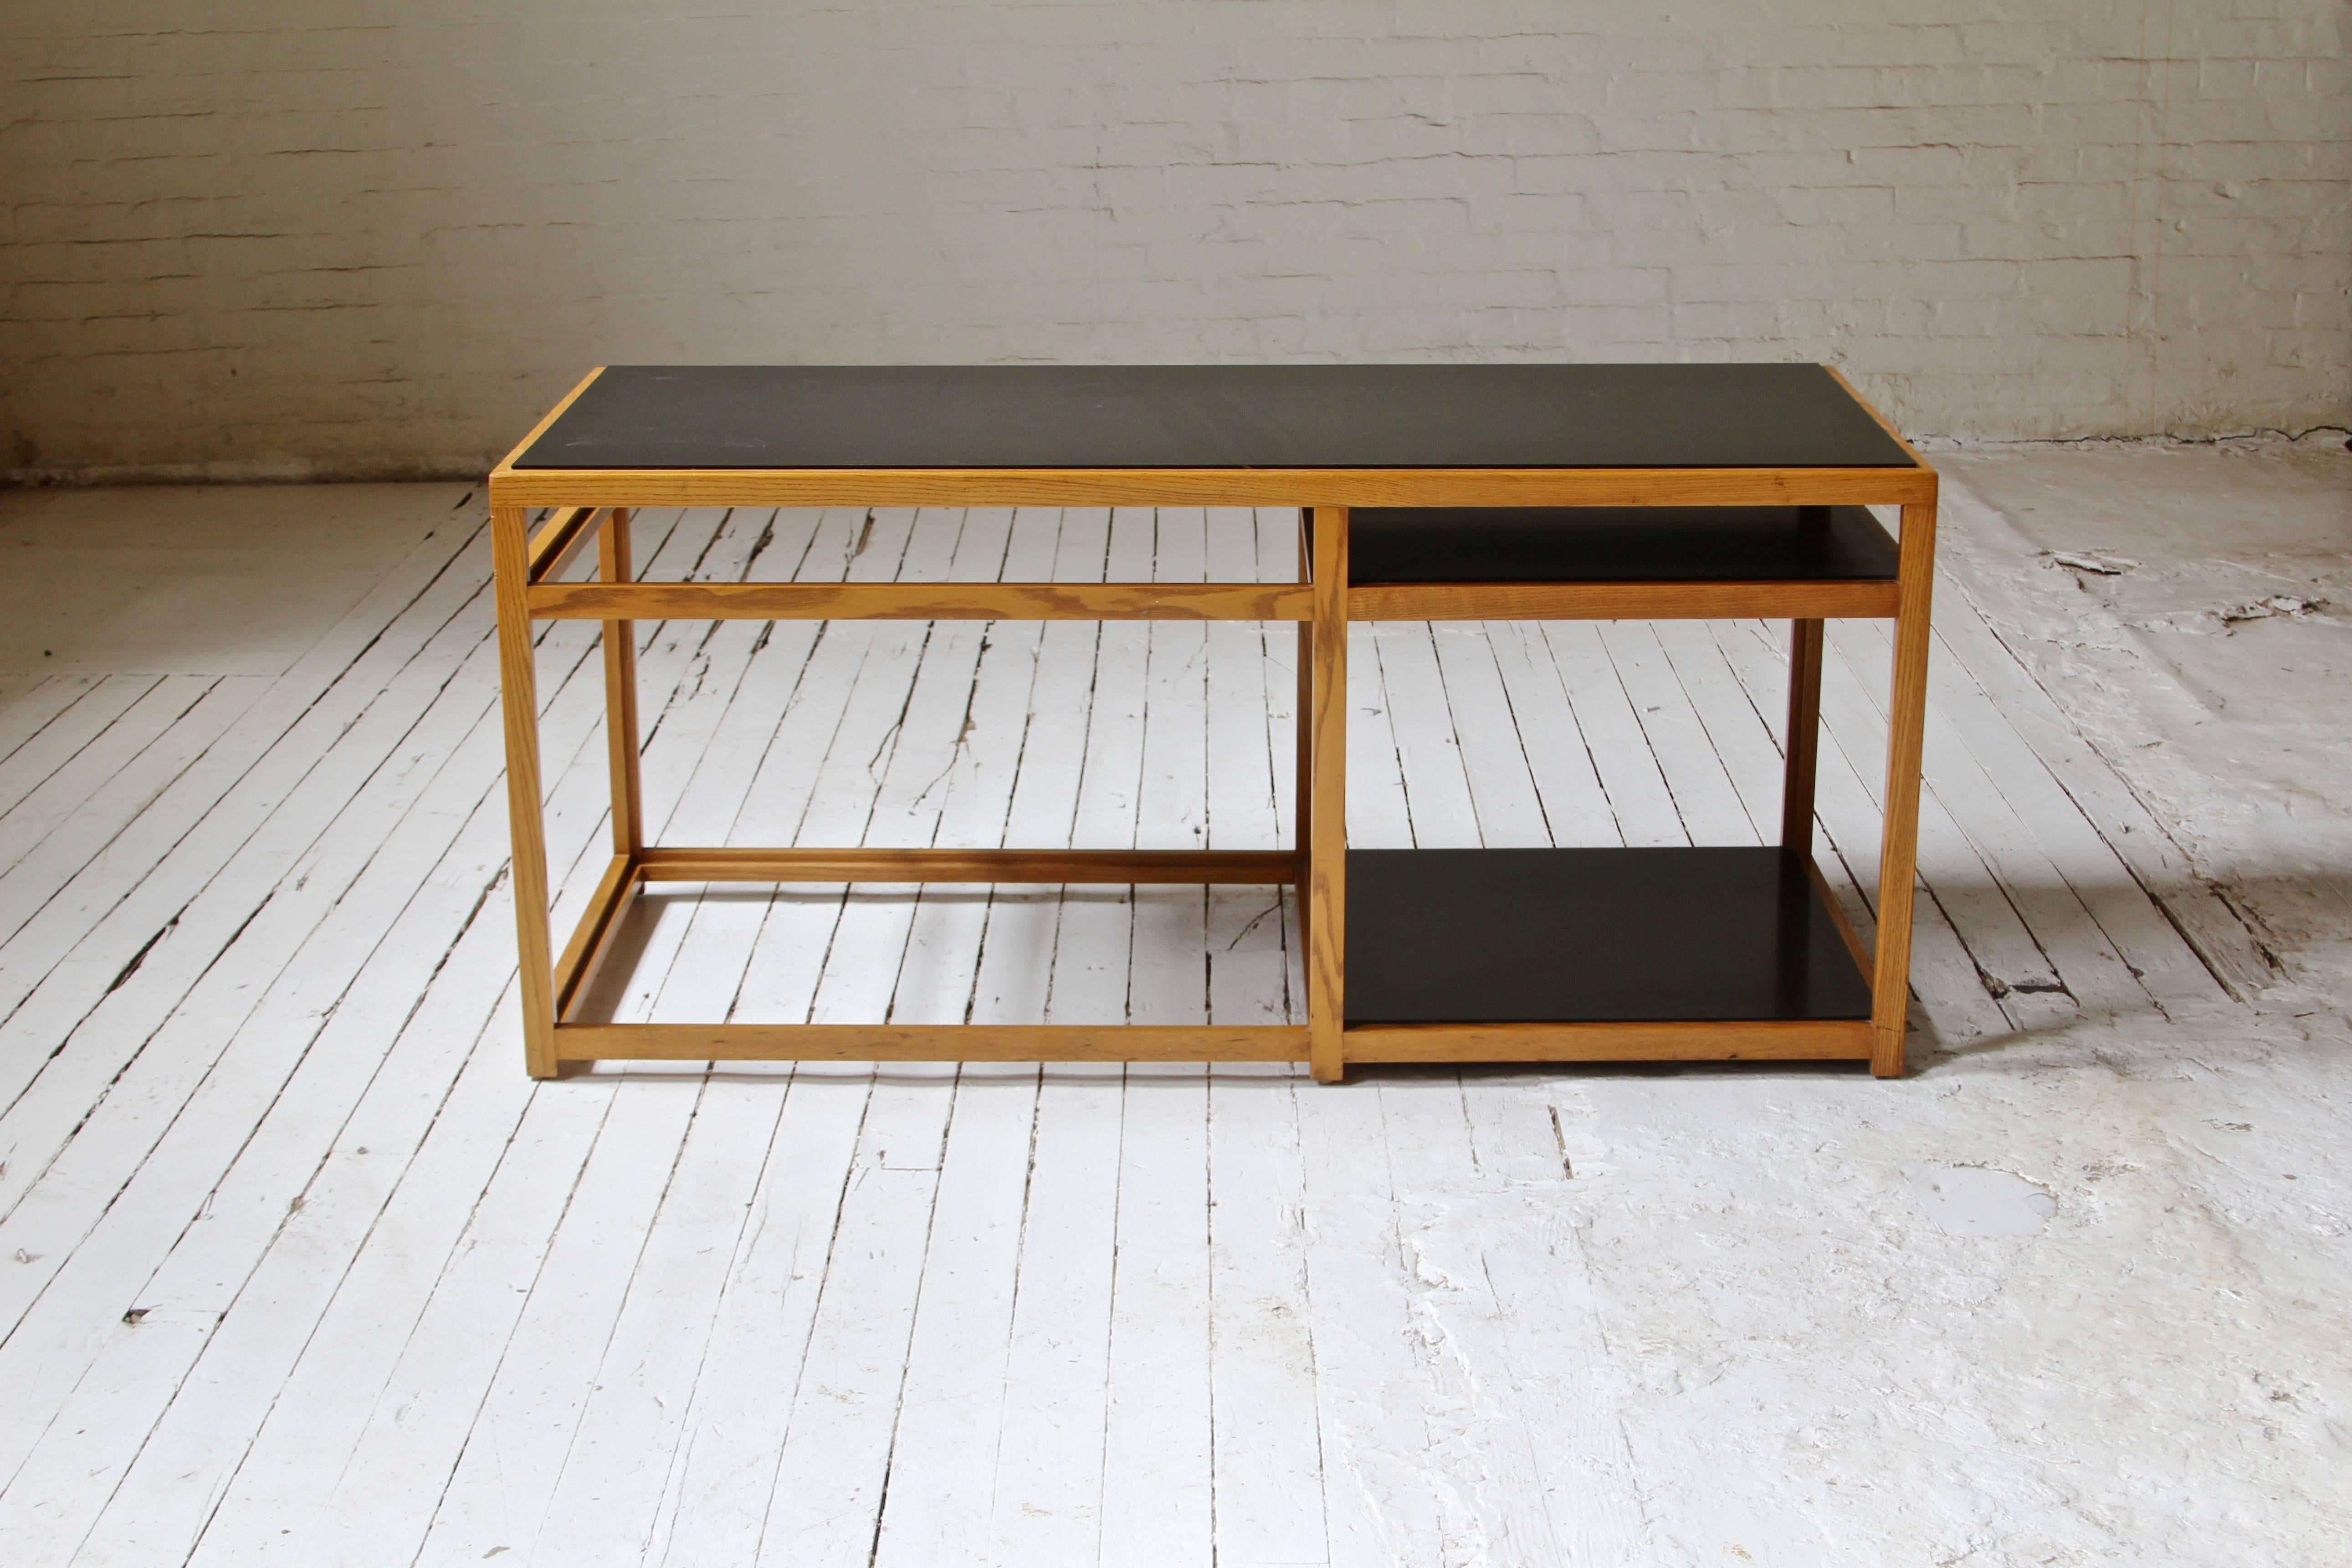 Geometrically conceived low table with solid ash construction and black laminate top, Edward Wormley for Dunbar, circa 1955.